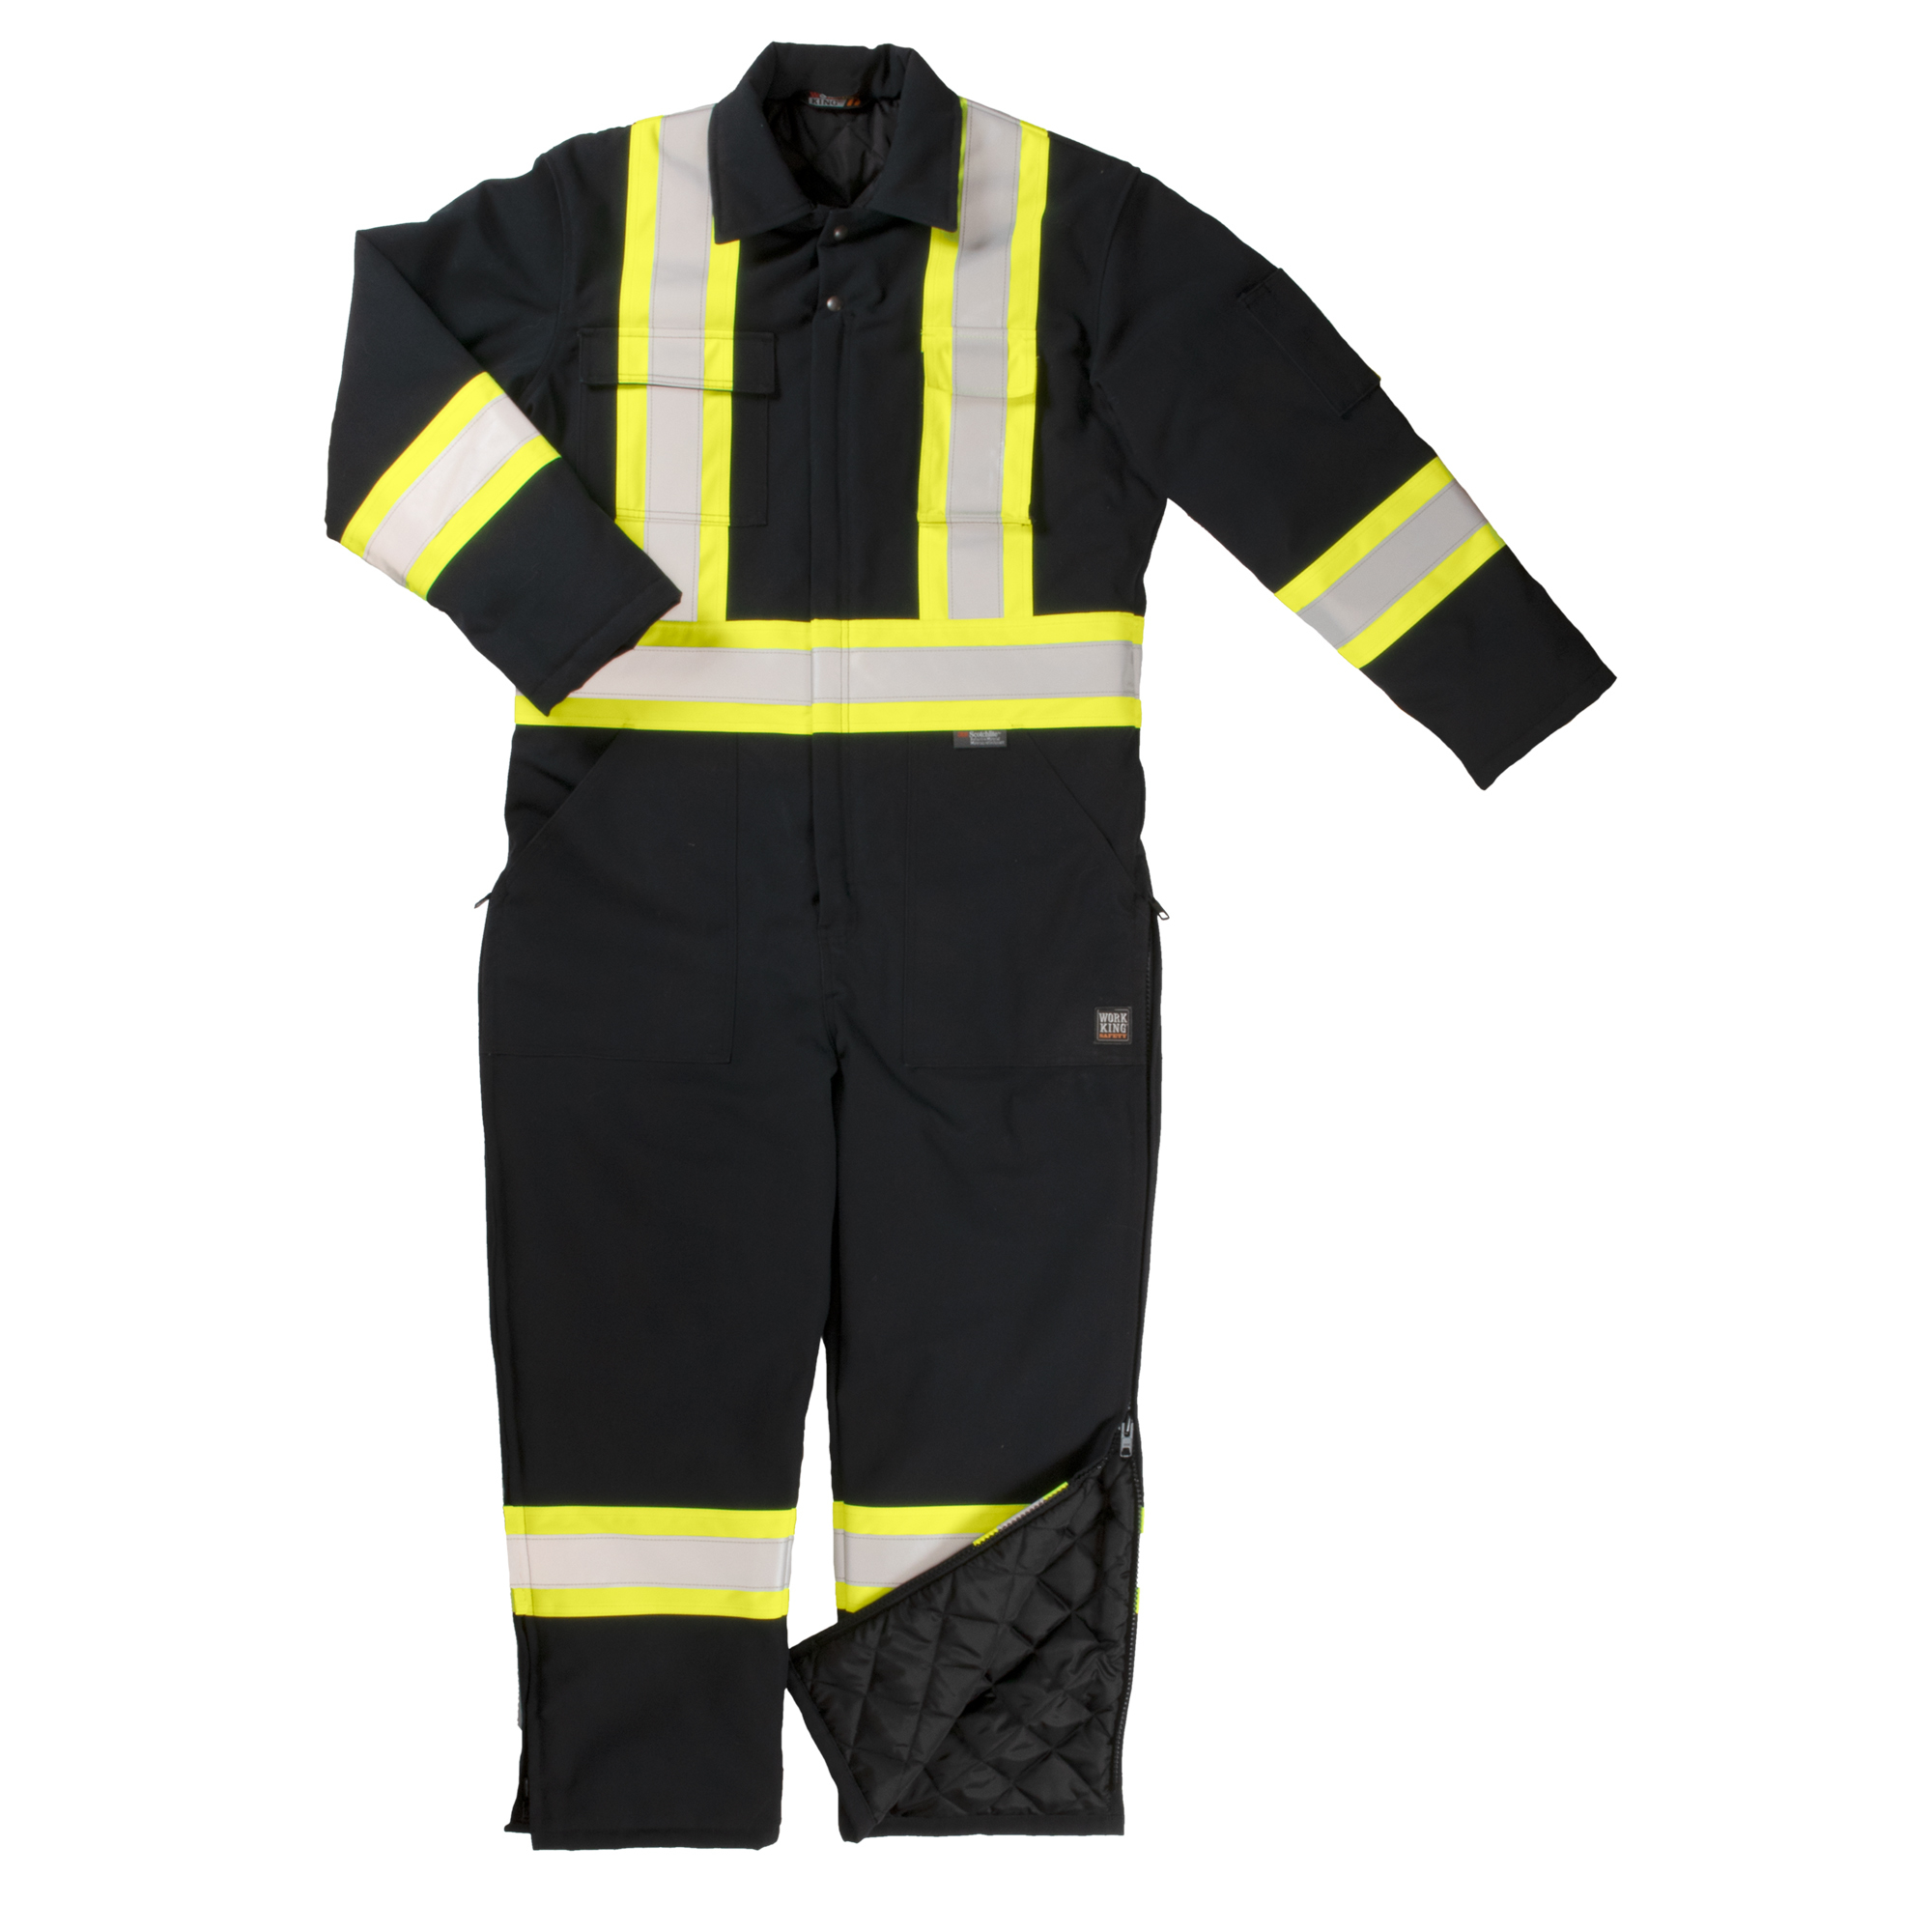 Tough Duck, Insulated Safety Coverall, Size 3XL, Color Black, Model S78721